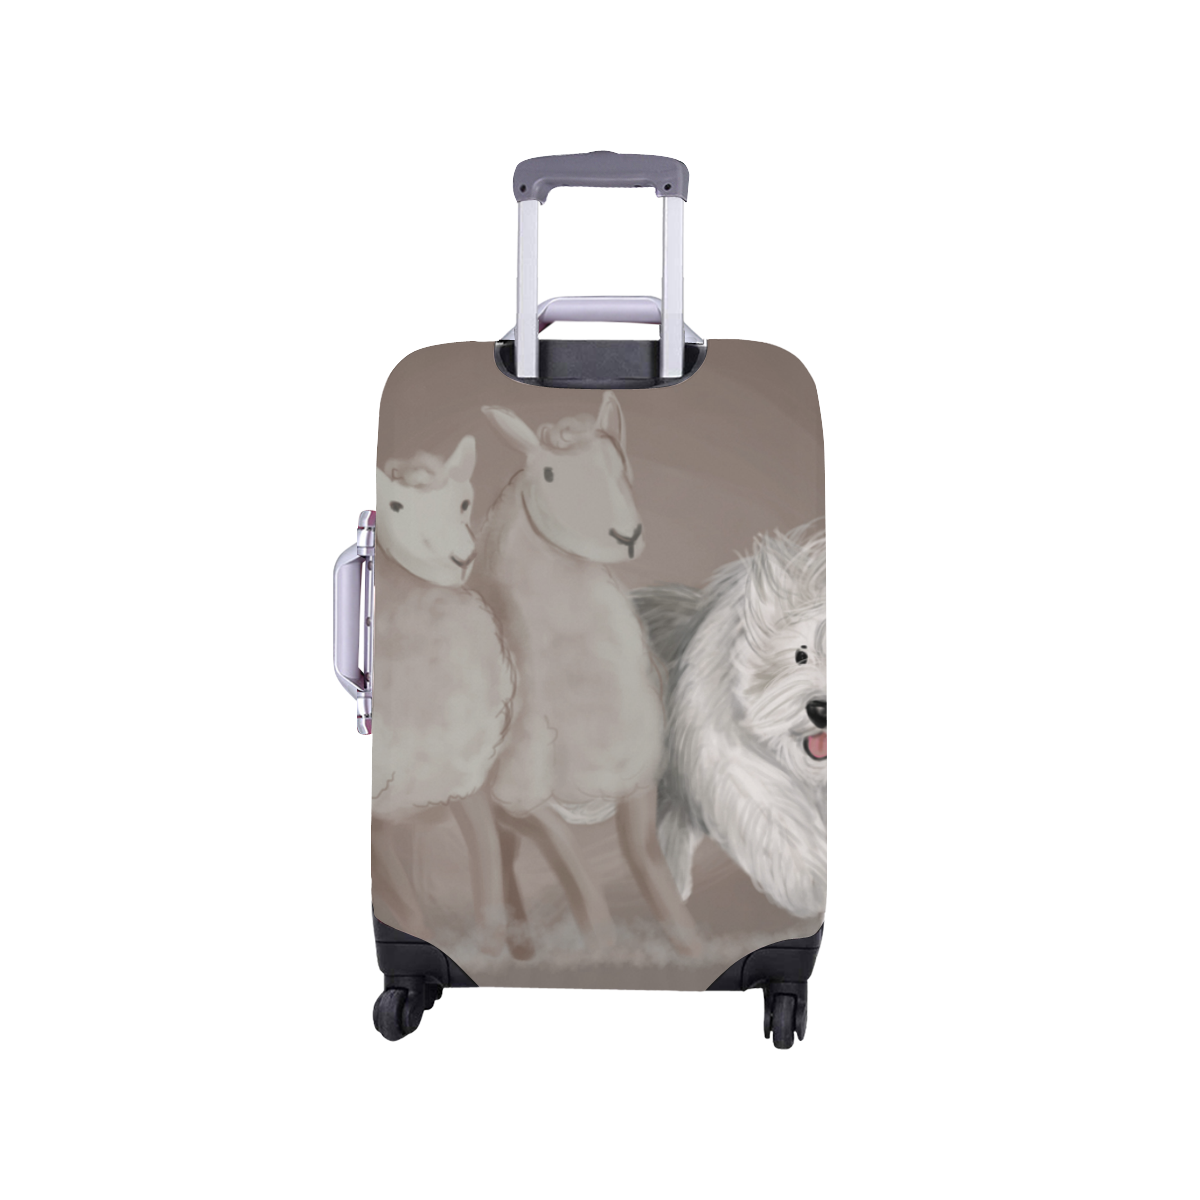 sheepdog-herding Luggage Cover/Small 18"-21"